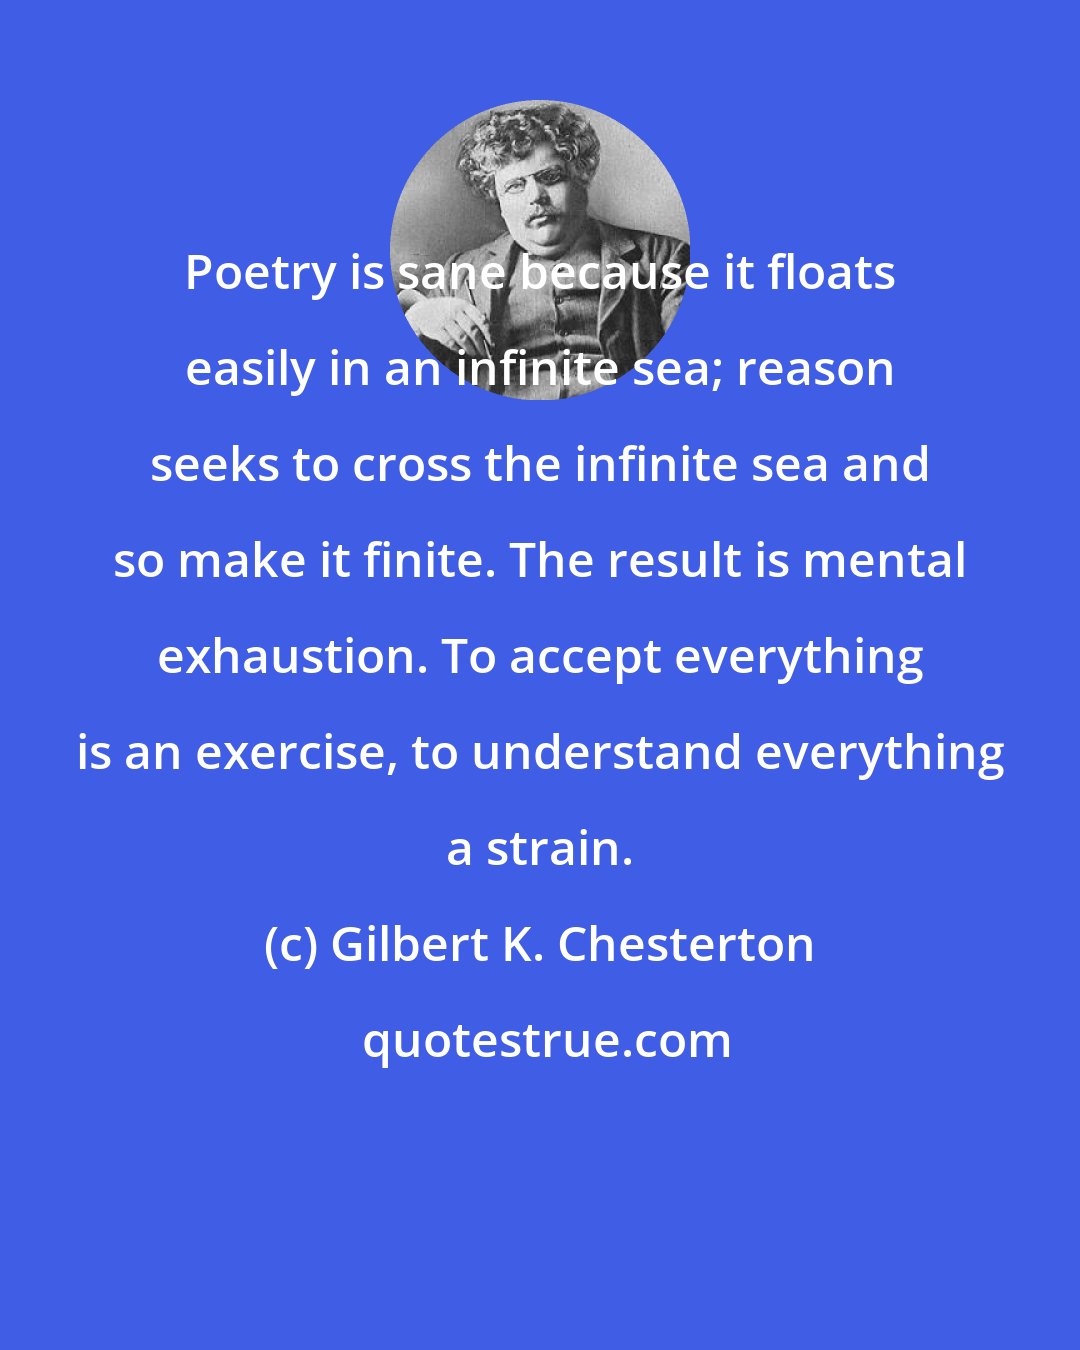 Gilbert K. Chesterton: Poetry is sane because it floats easily in an infinite sea; reason seeks to cross the infinite sea and so make it finite. The result is mental exhaustion. To accept everything is an exercise, to understand everything a strain.